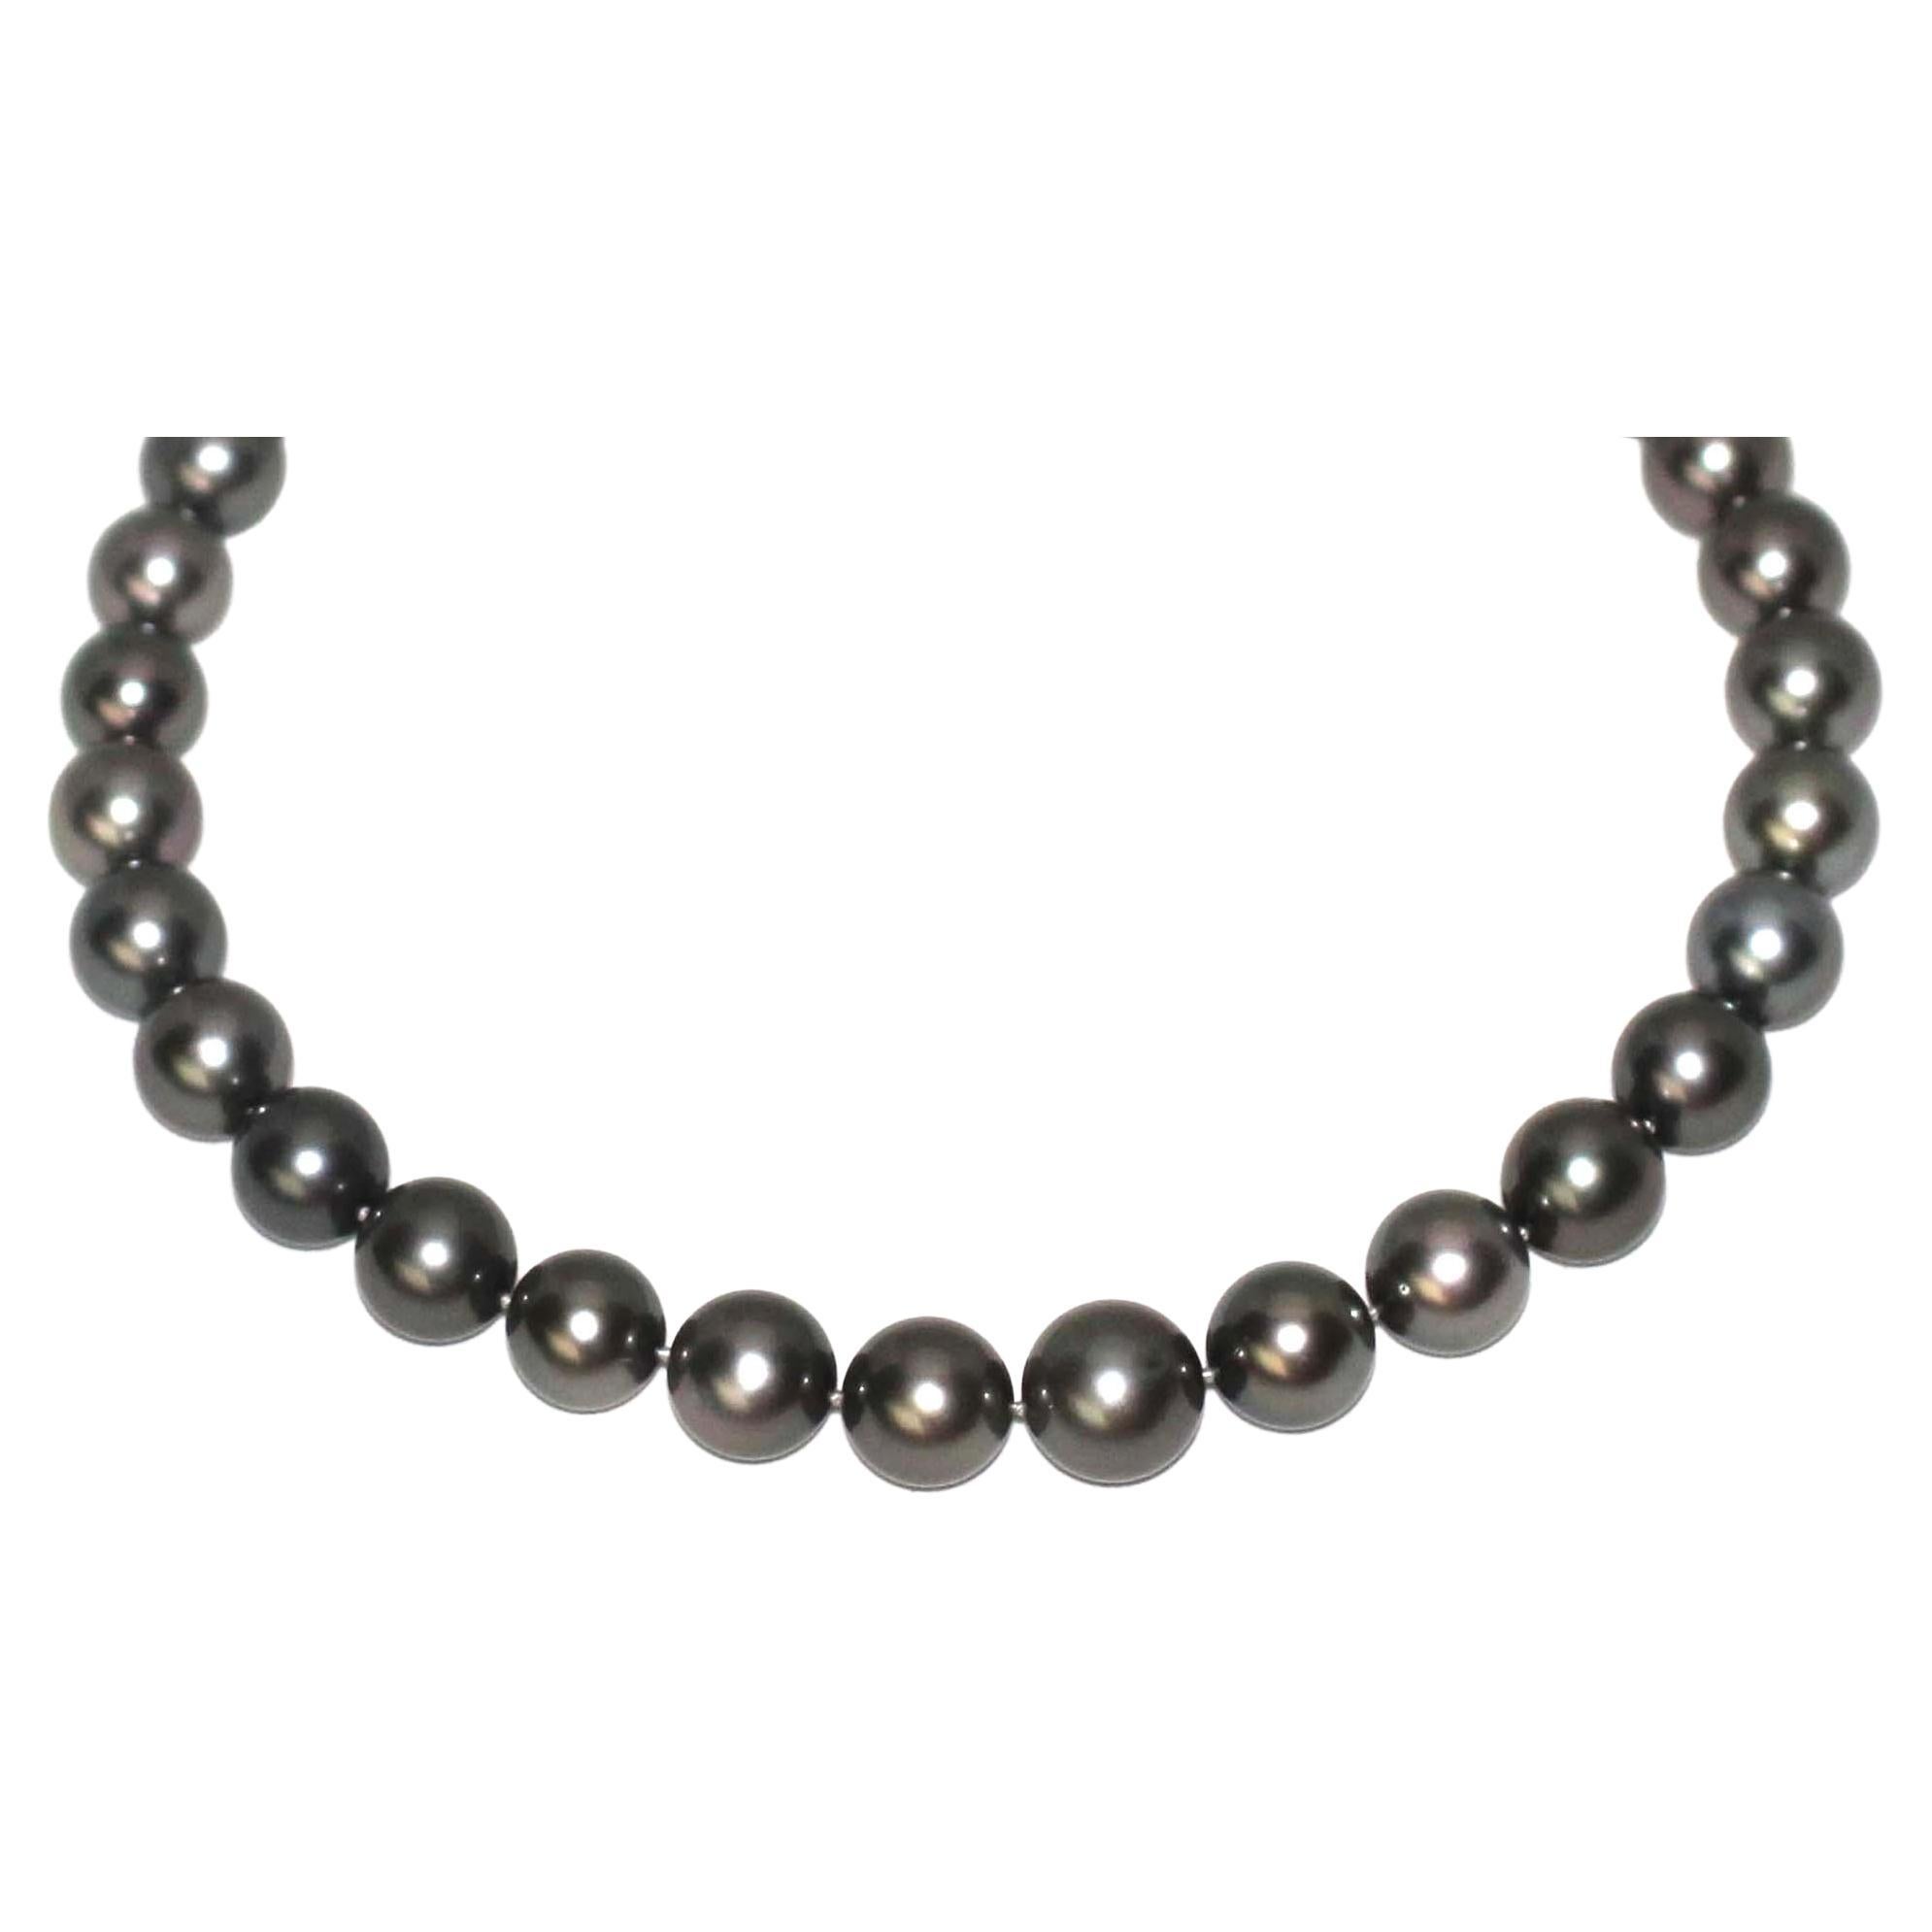 Hakimoto By Jewel Of Ocean Tahitian Necklace.
31 Black Pearl 12x14.4mm Tahitian South Sea Pearl
Manufactures List Price $48,000
18K Diamond White Gold Clasp